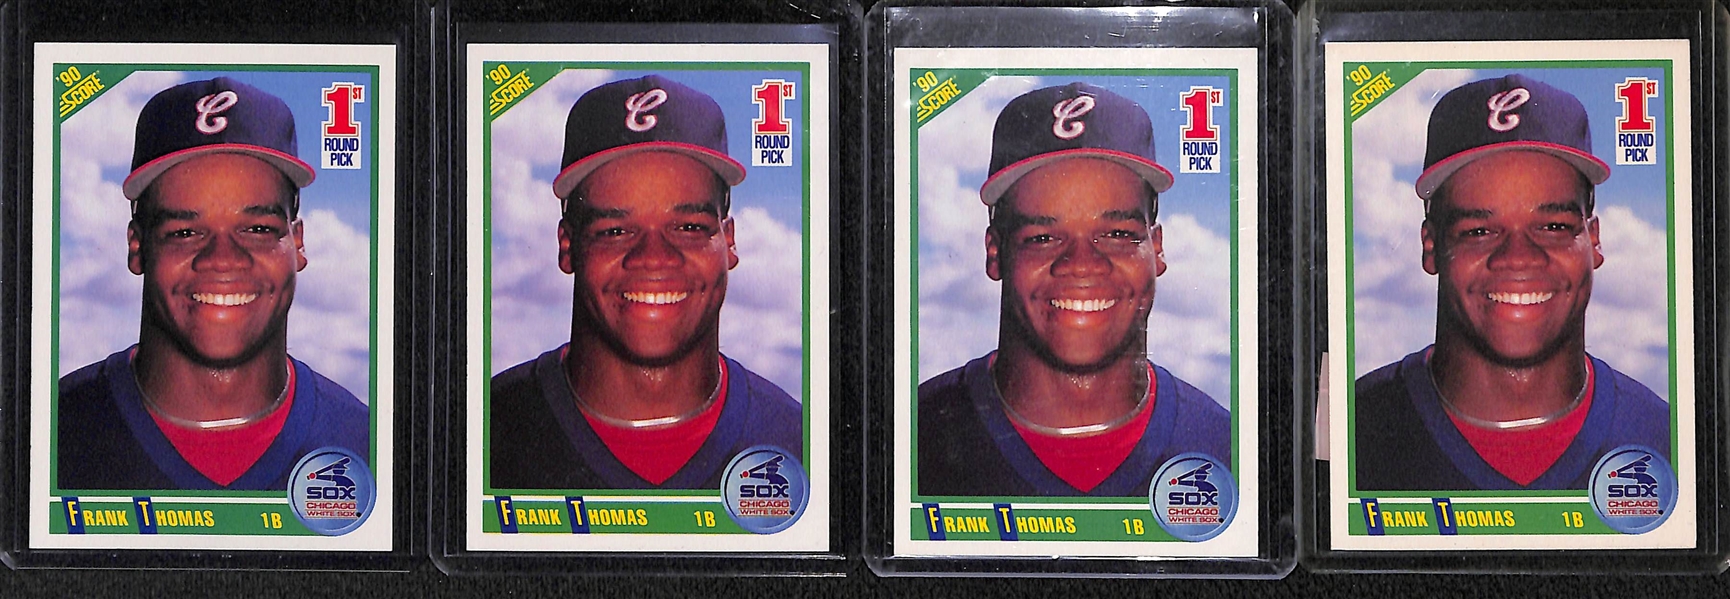 Lot of 21 - 1990 Frank Thomas Rookie Cards